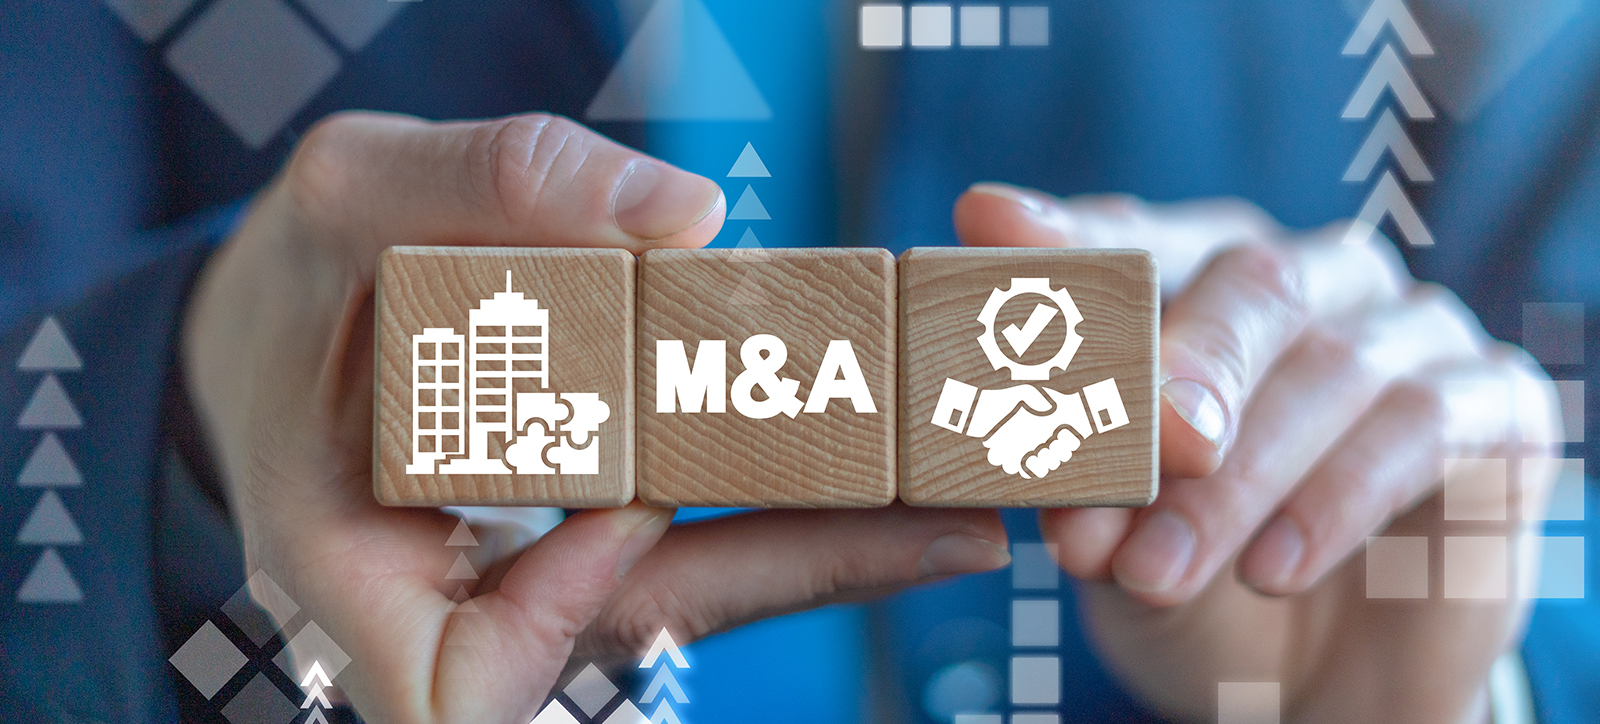 Two hands holding a series of wooden cubes showing the letters M&A